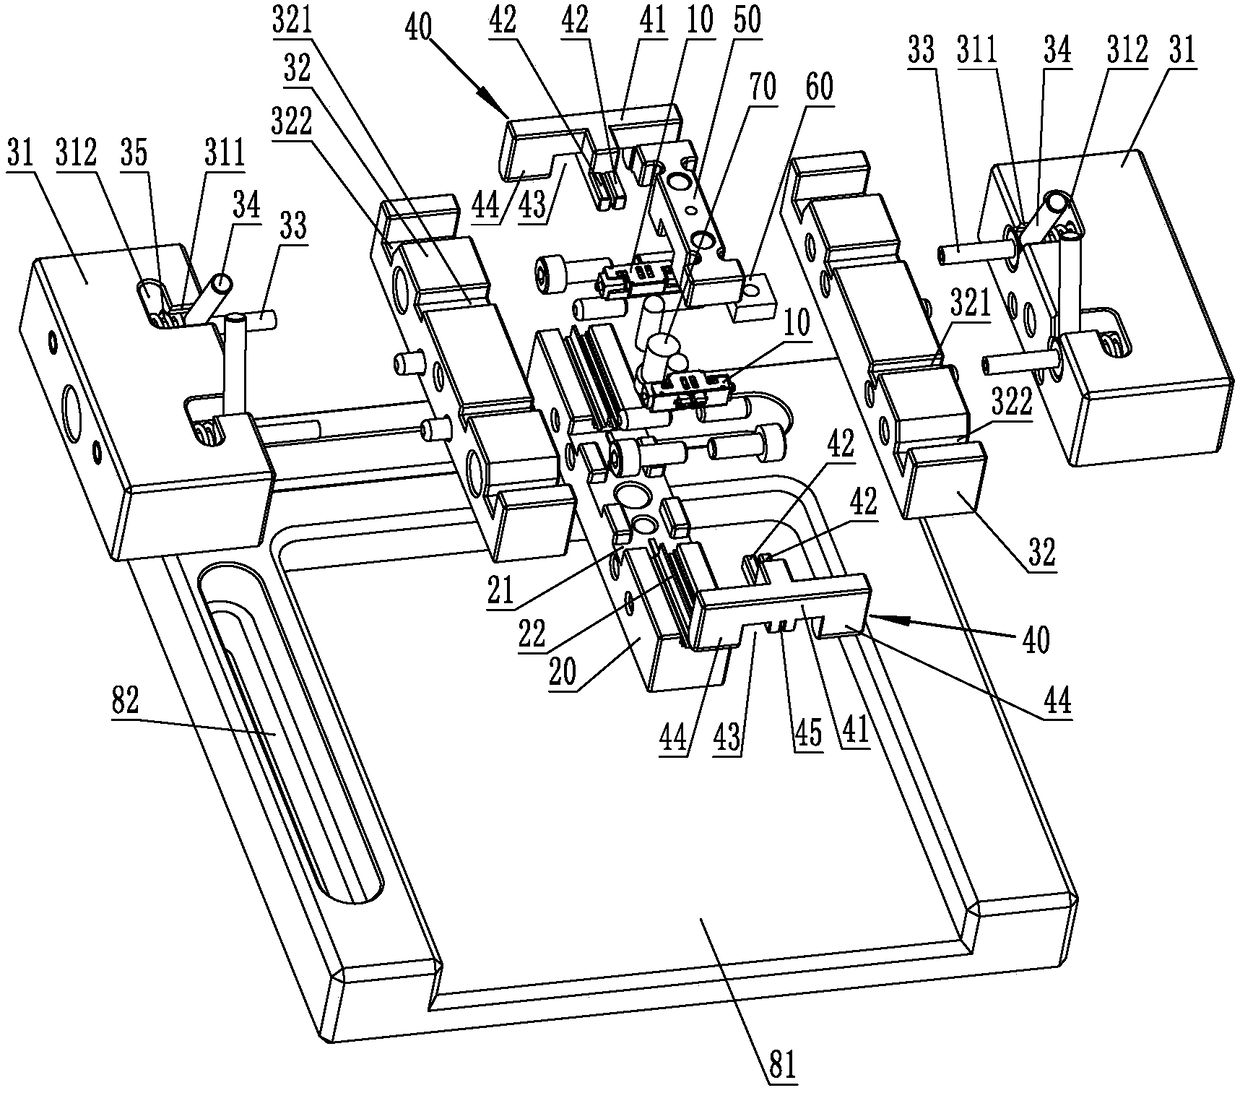 Buckle module assembly tooling